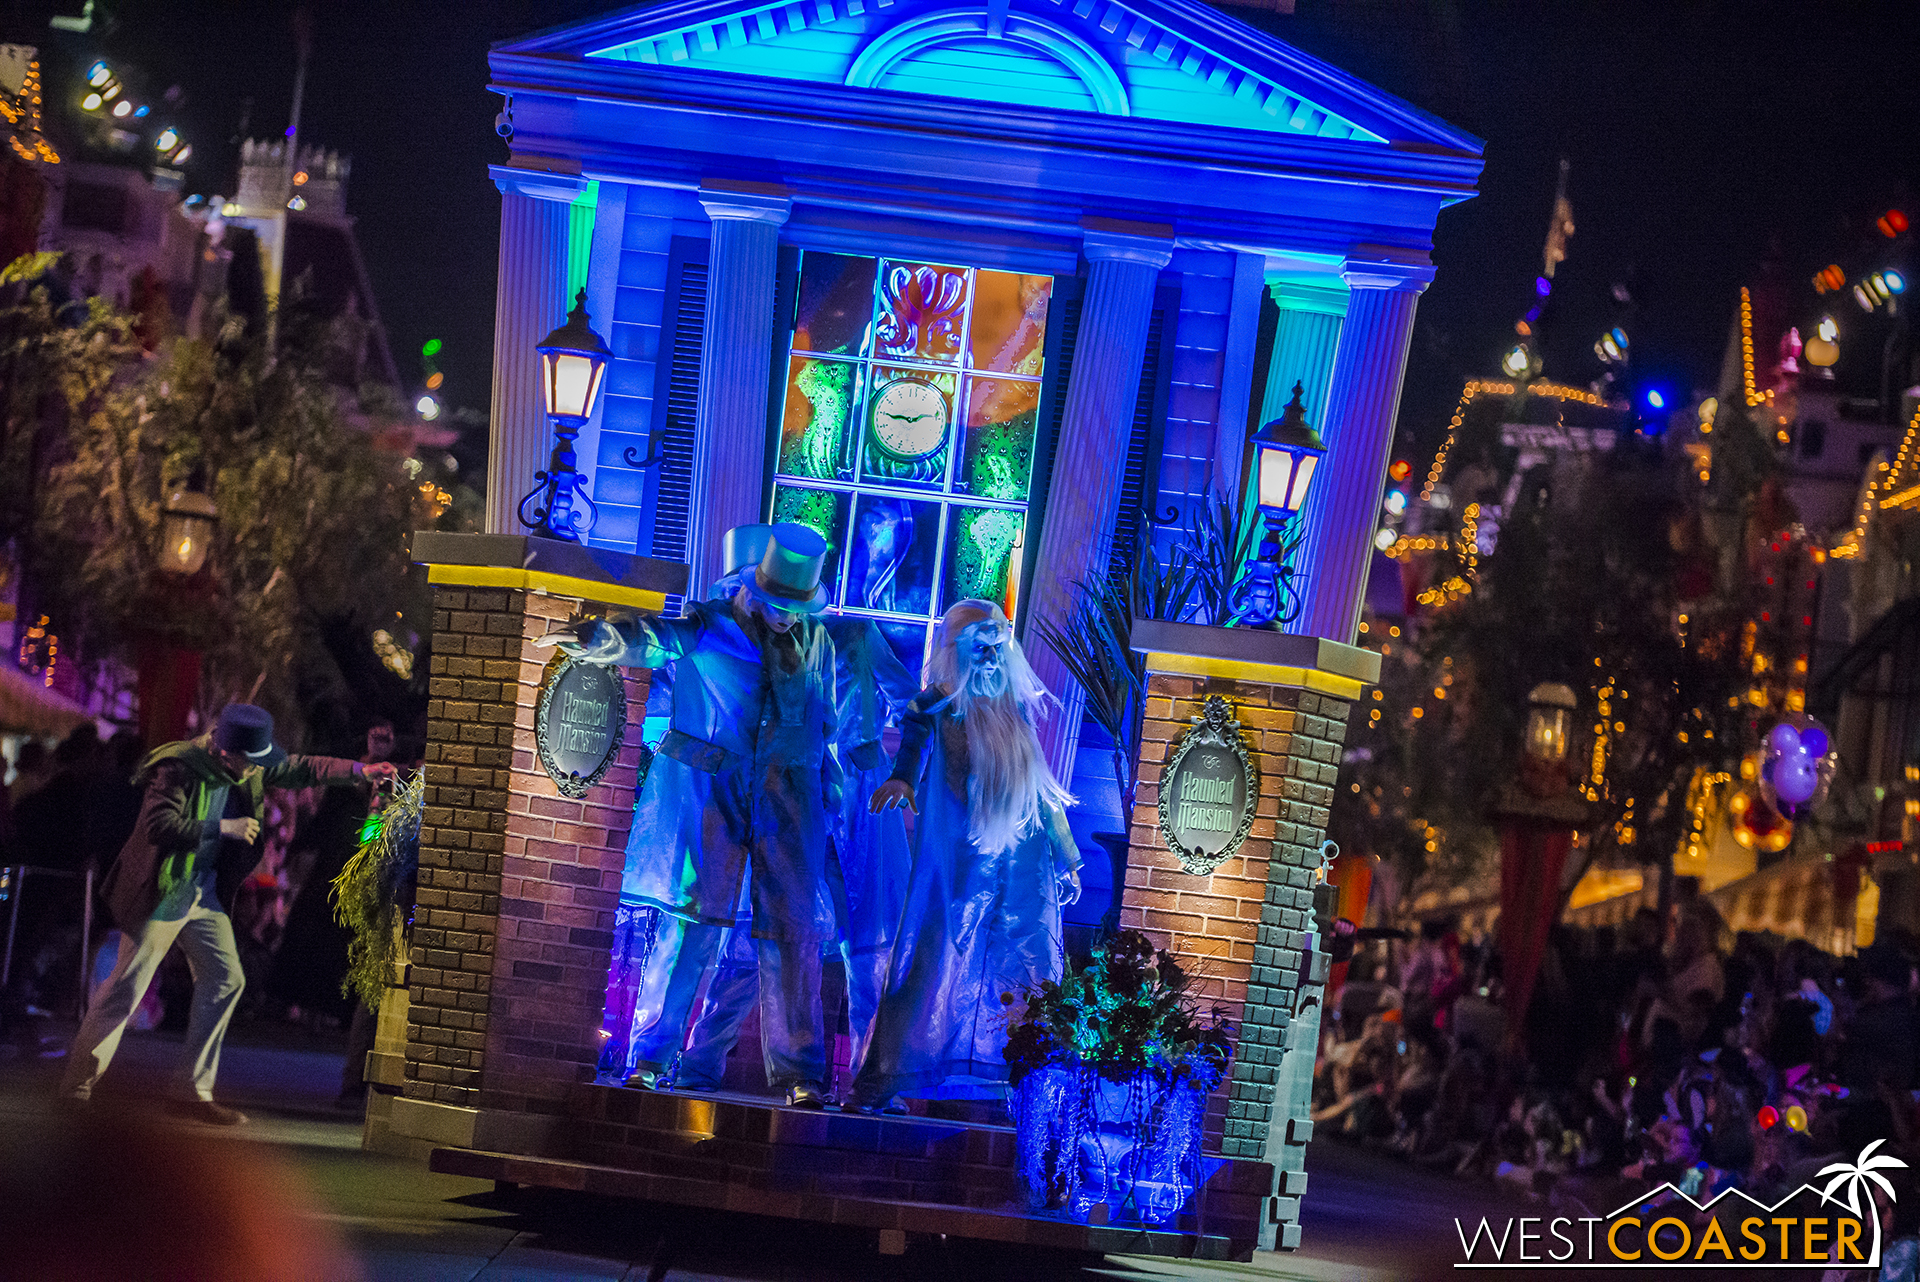  As they part, they reveal the Hitchhiking Ghosts at the front of the float! 